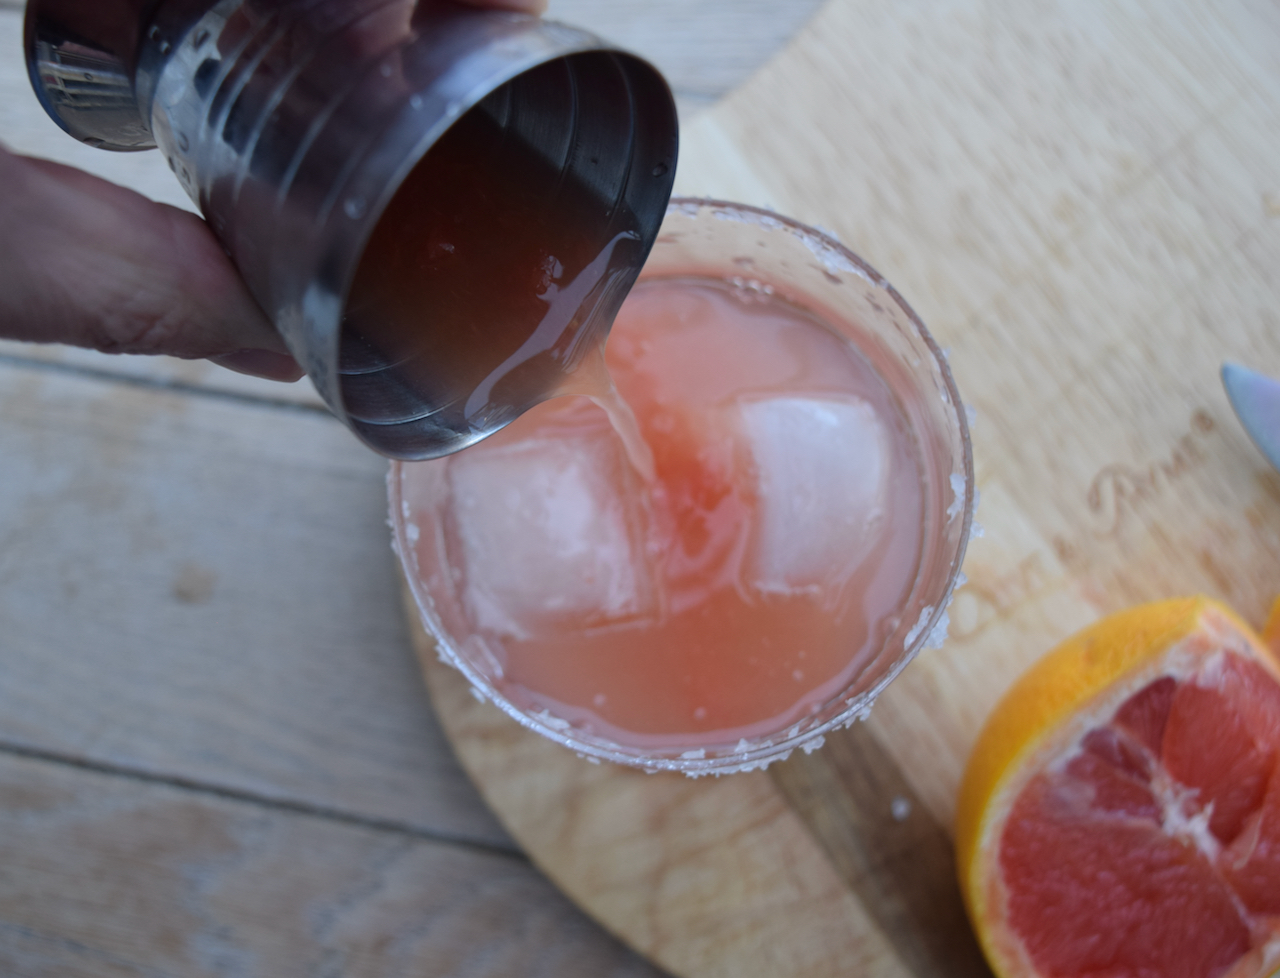 Salty Dog cocktail recipe from Lucy Loves Food Blog